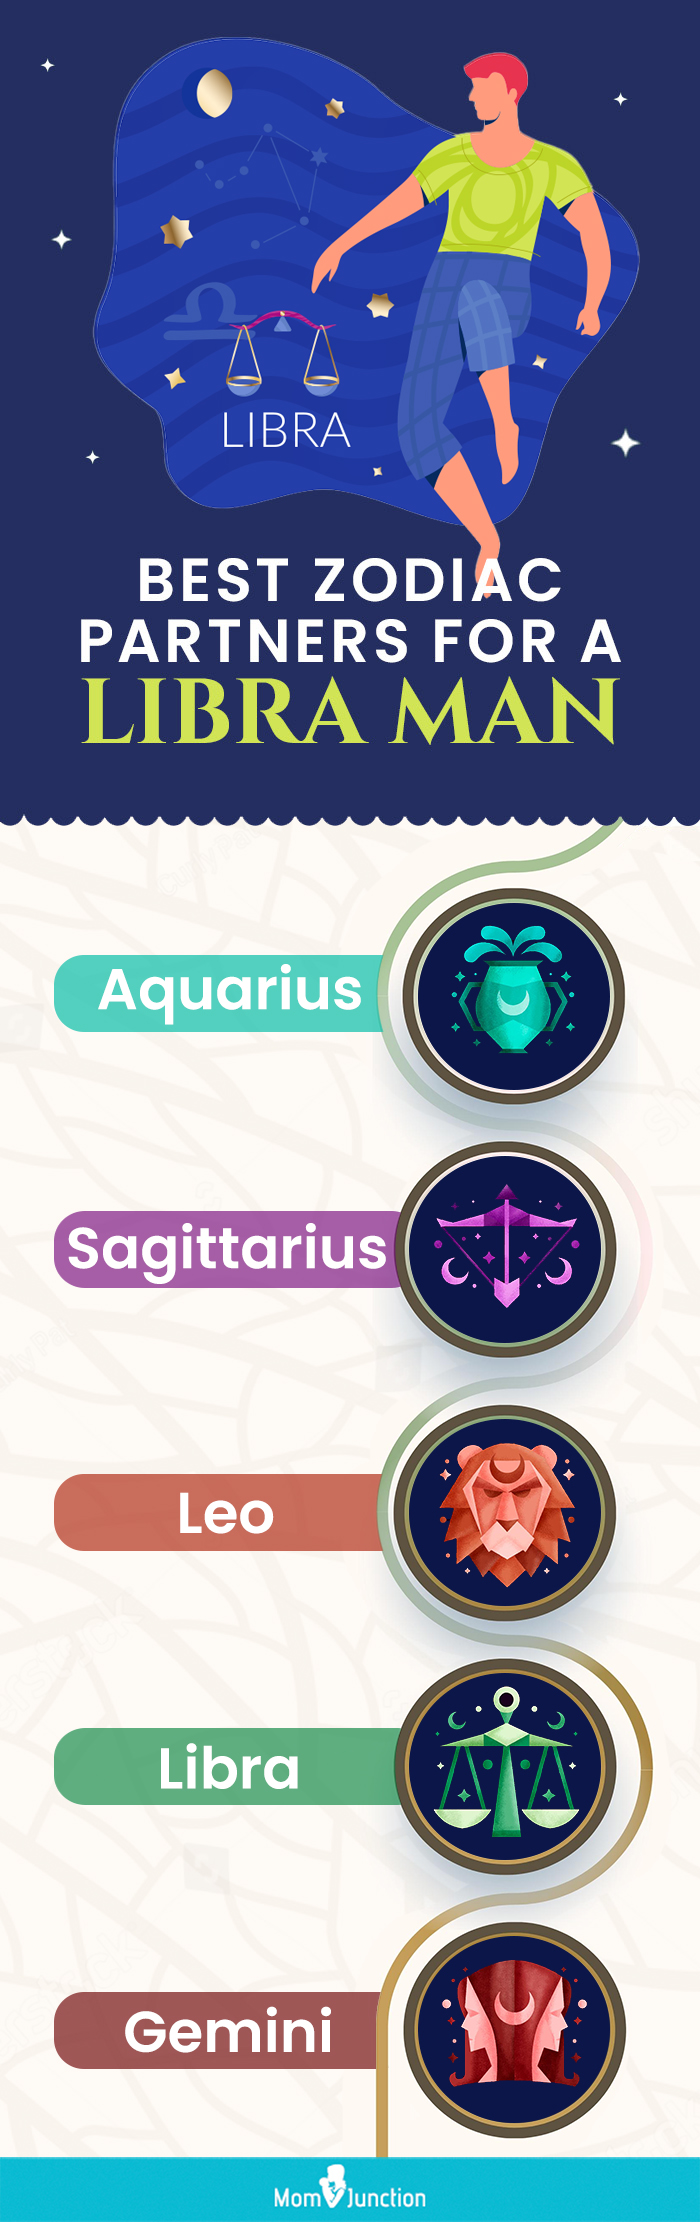 best zodiac partners for a libra man [infographic]